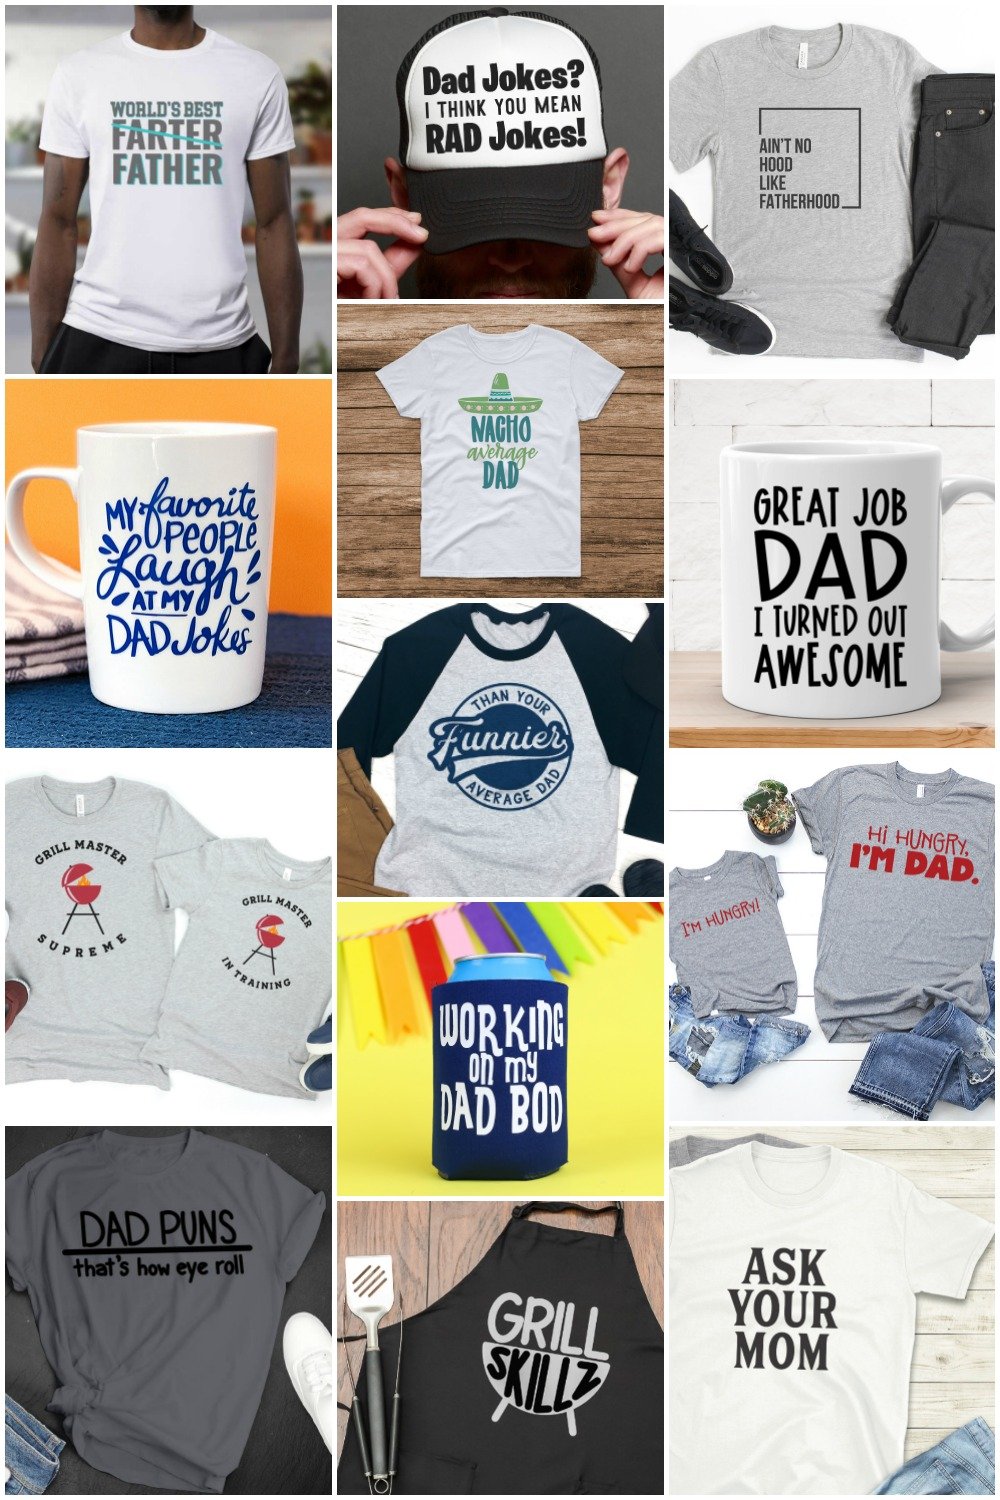 Image of 13 Father\'s Day sayings on t-shirts, coffee mugs, a koozie and an apron.  Sayings are: Grill Master Supreme & Grill Master In Training, Ain’t No Hood Like Fatherhood, Funnier Than Your Average Dad,  Ask Your Mom, Dad Jokes? I Think You Mean RAD Jokes!, Working on My Dad Bod, Hi Hungry, I’m Dad, Grill Skillz, World’s Best Farter…Father, Nacho Average Dad, Great Job Dad I Turned Out Awesome, Dad Jokes – that’s how eye roll, Laugh at my Dad Jokes 